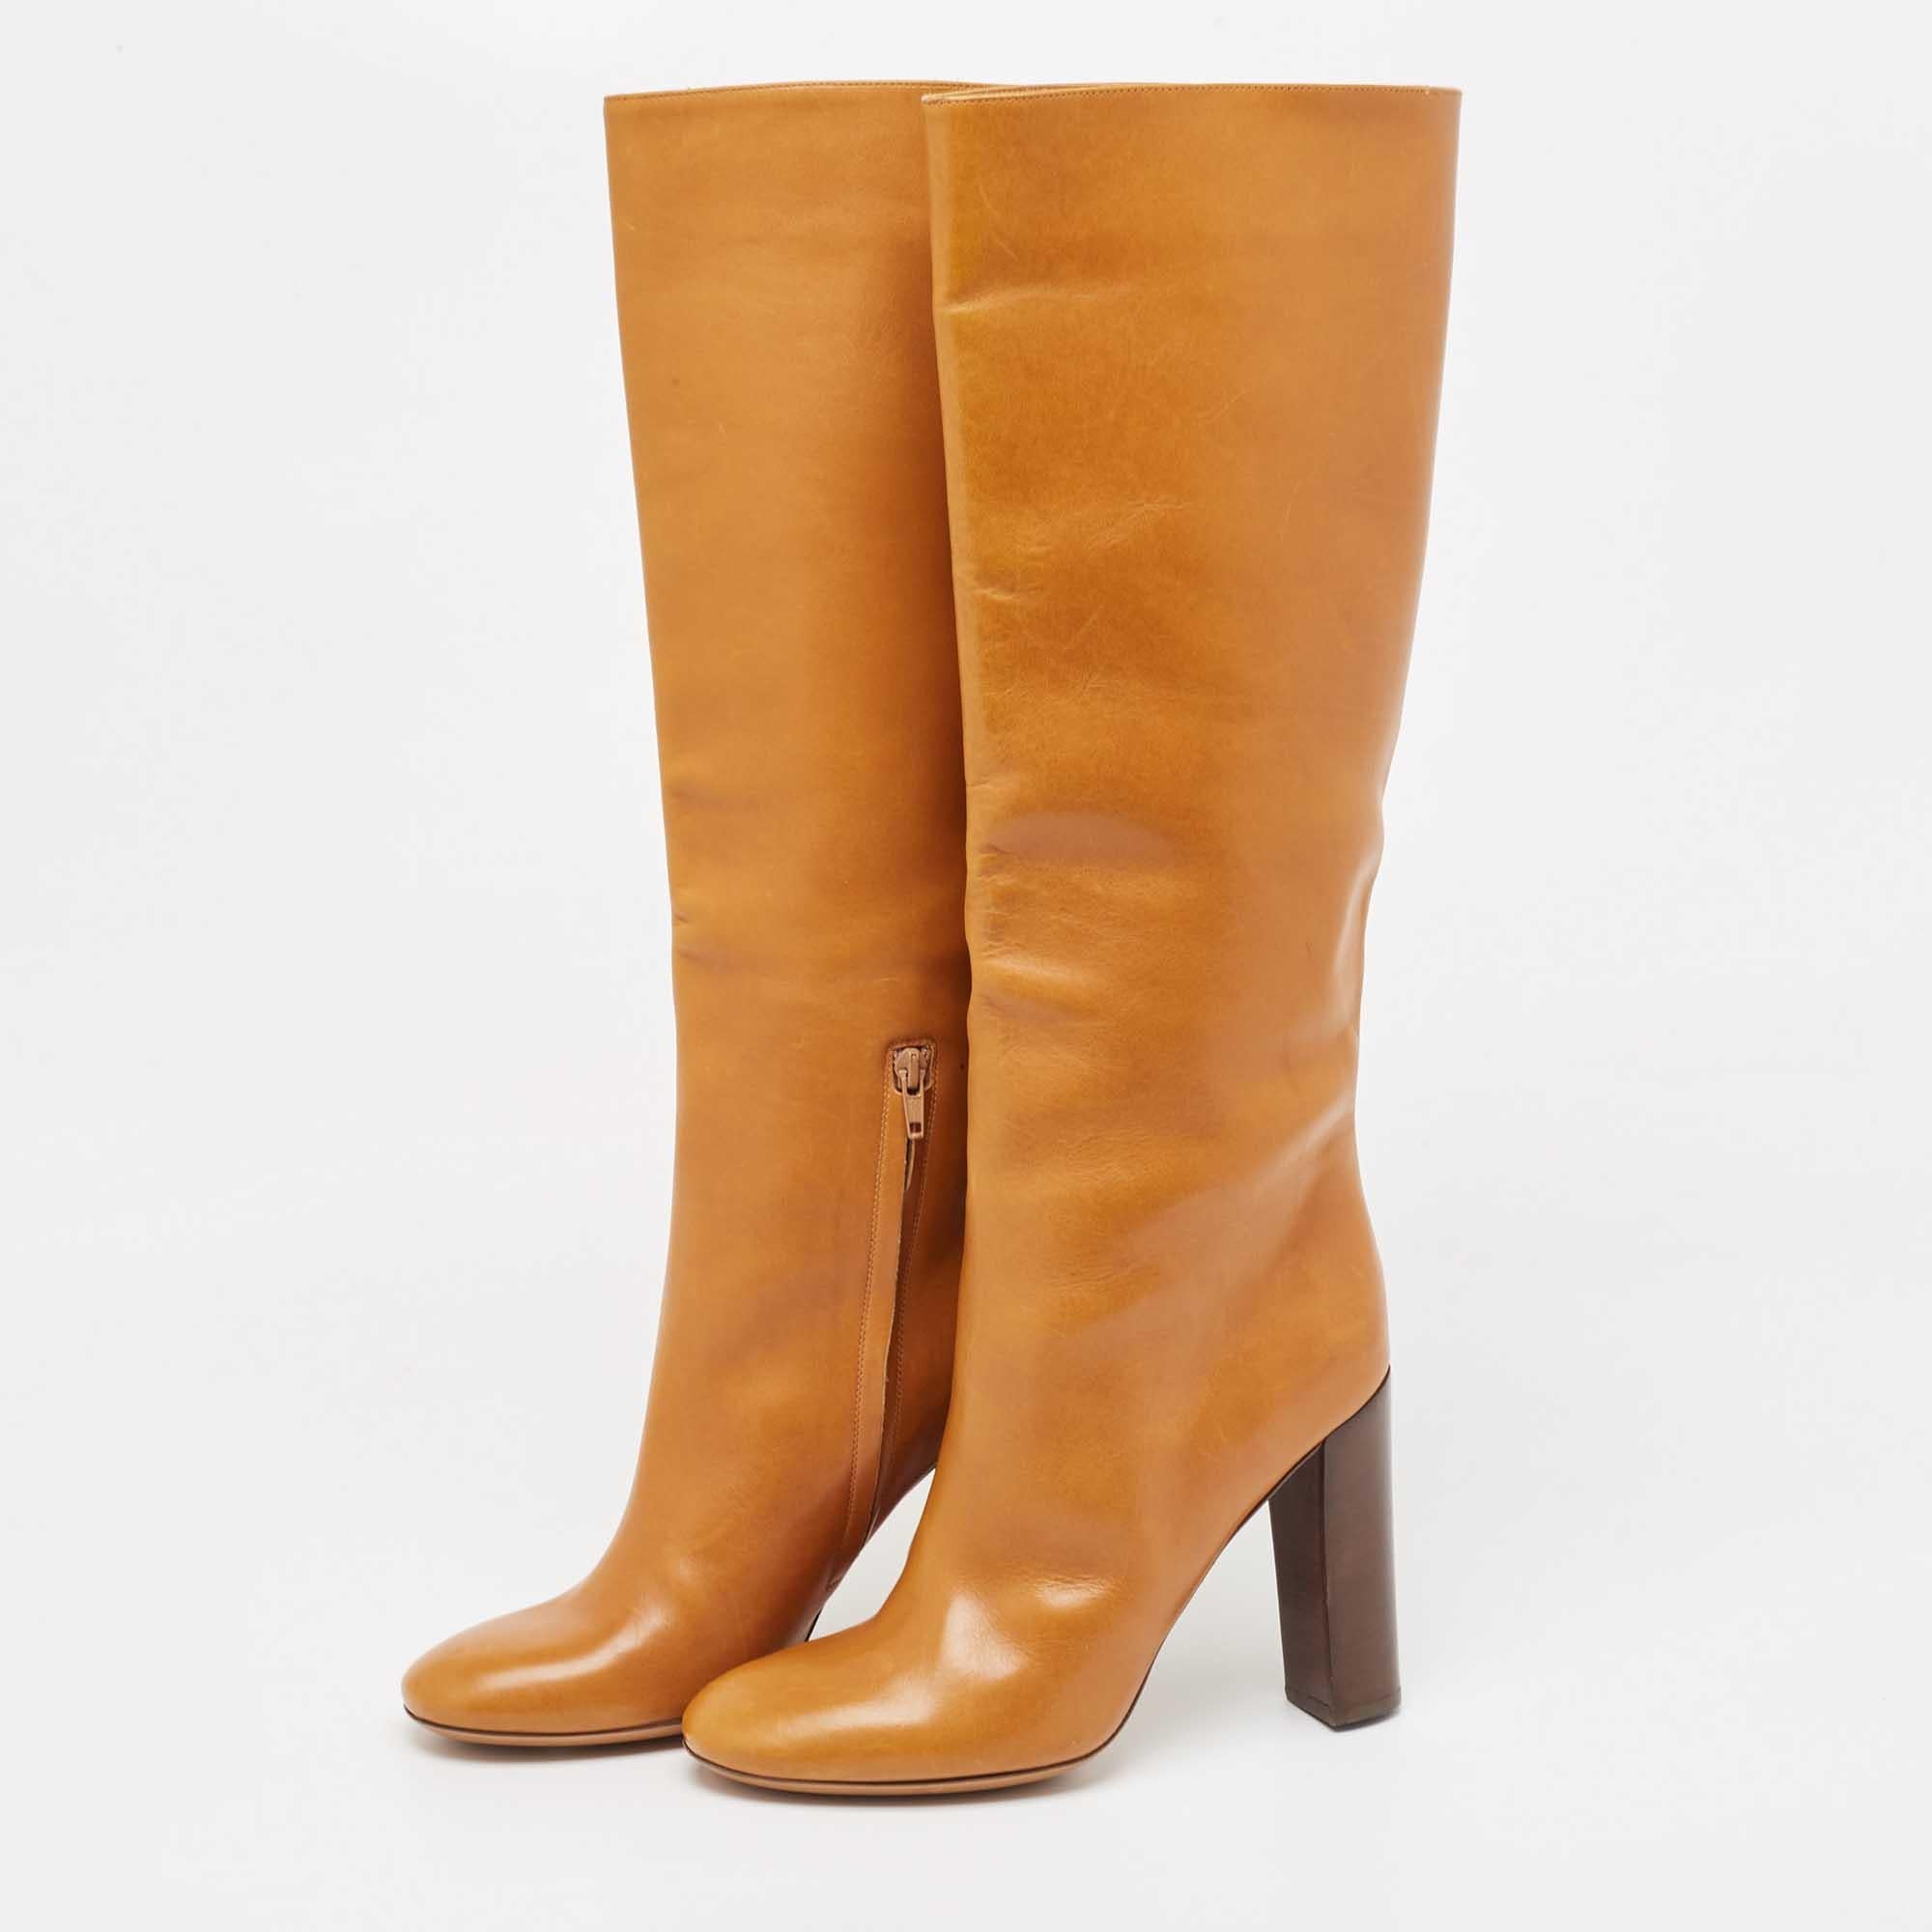 Chloe Brown Leather Knee Length Boots Size 41 For Sale 4